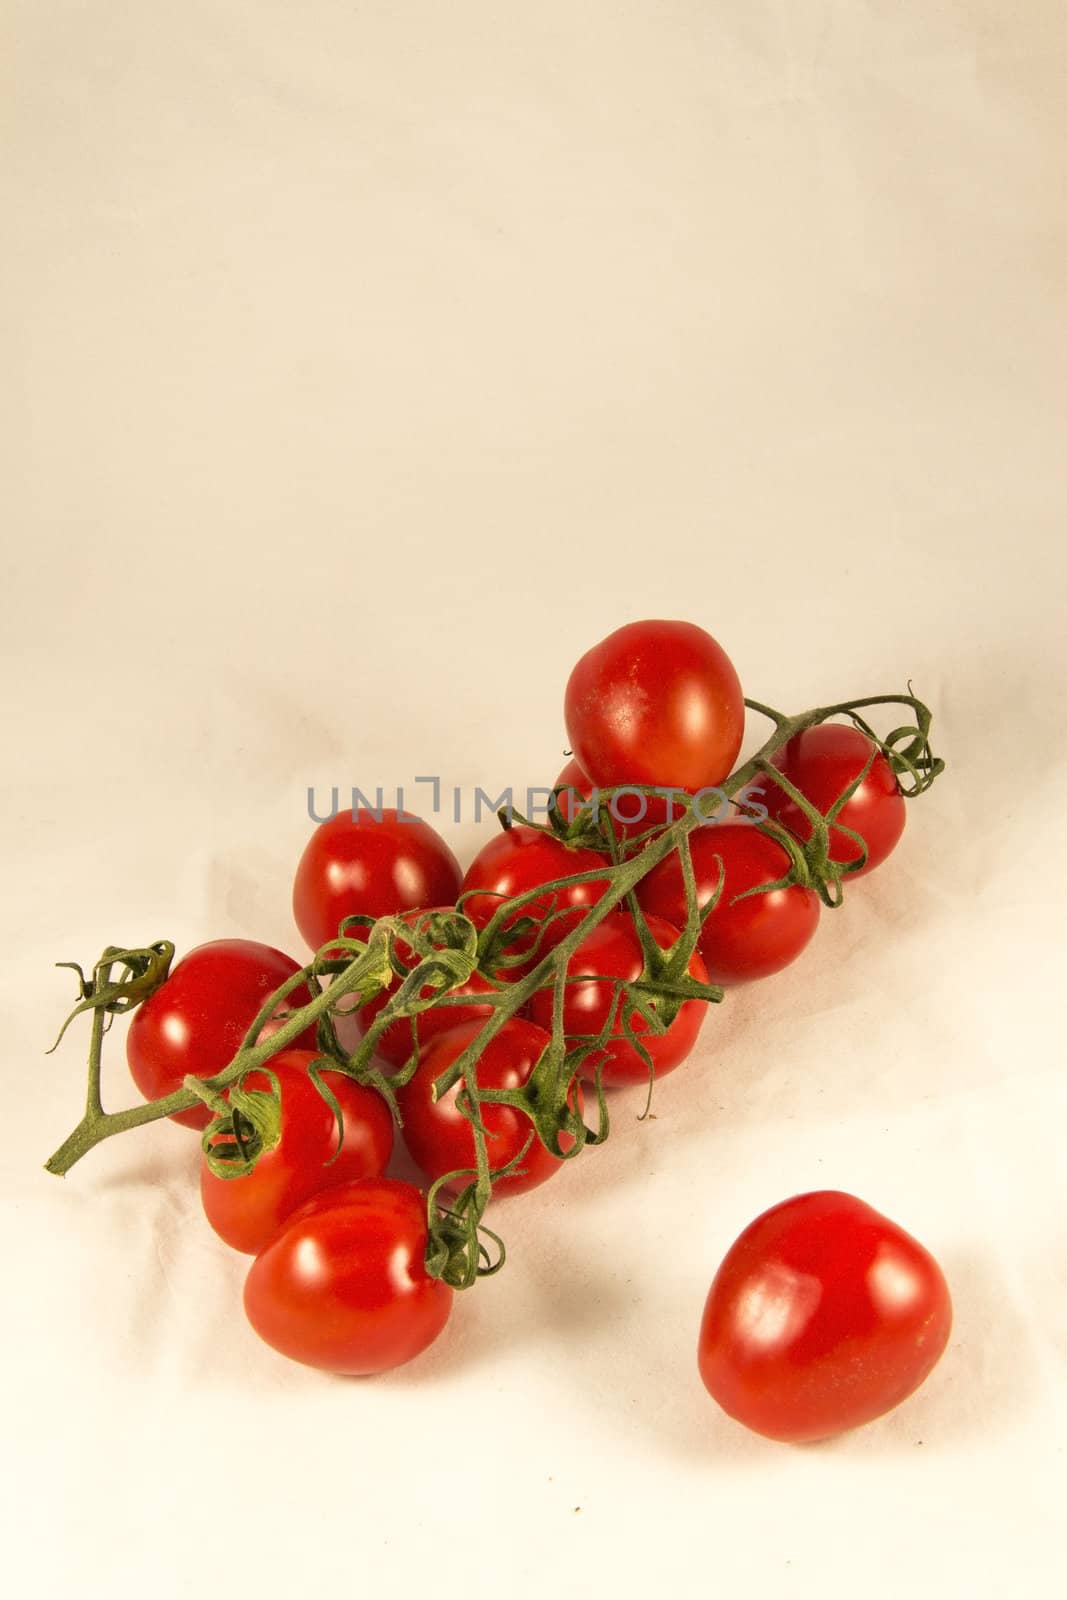 Tomatoes by itanu